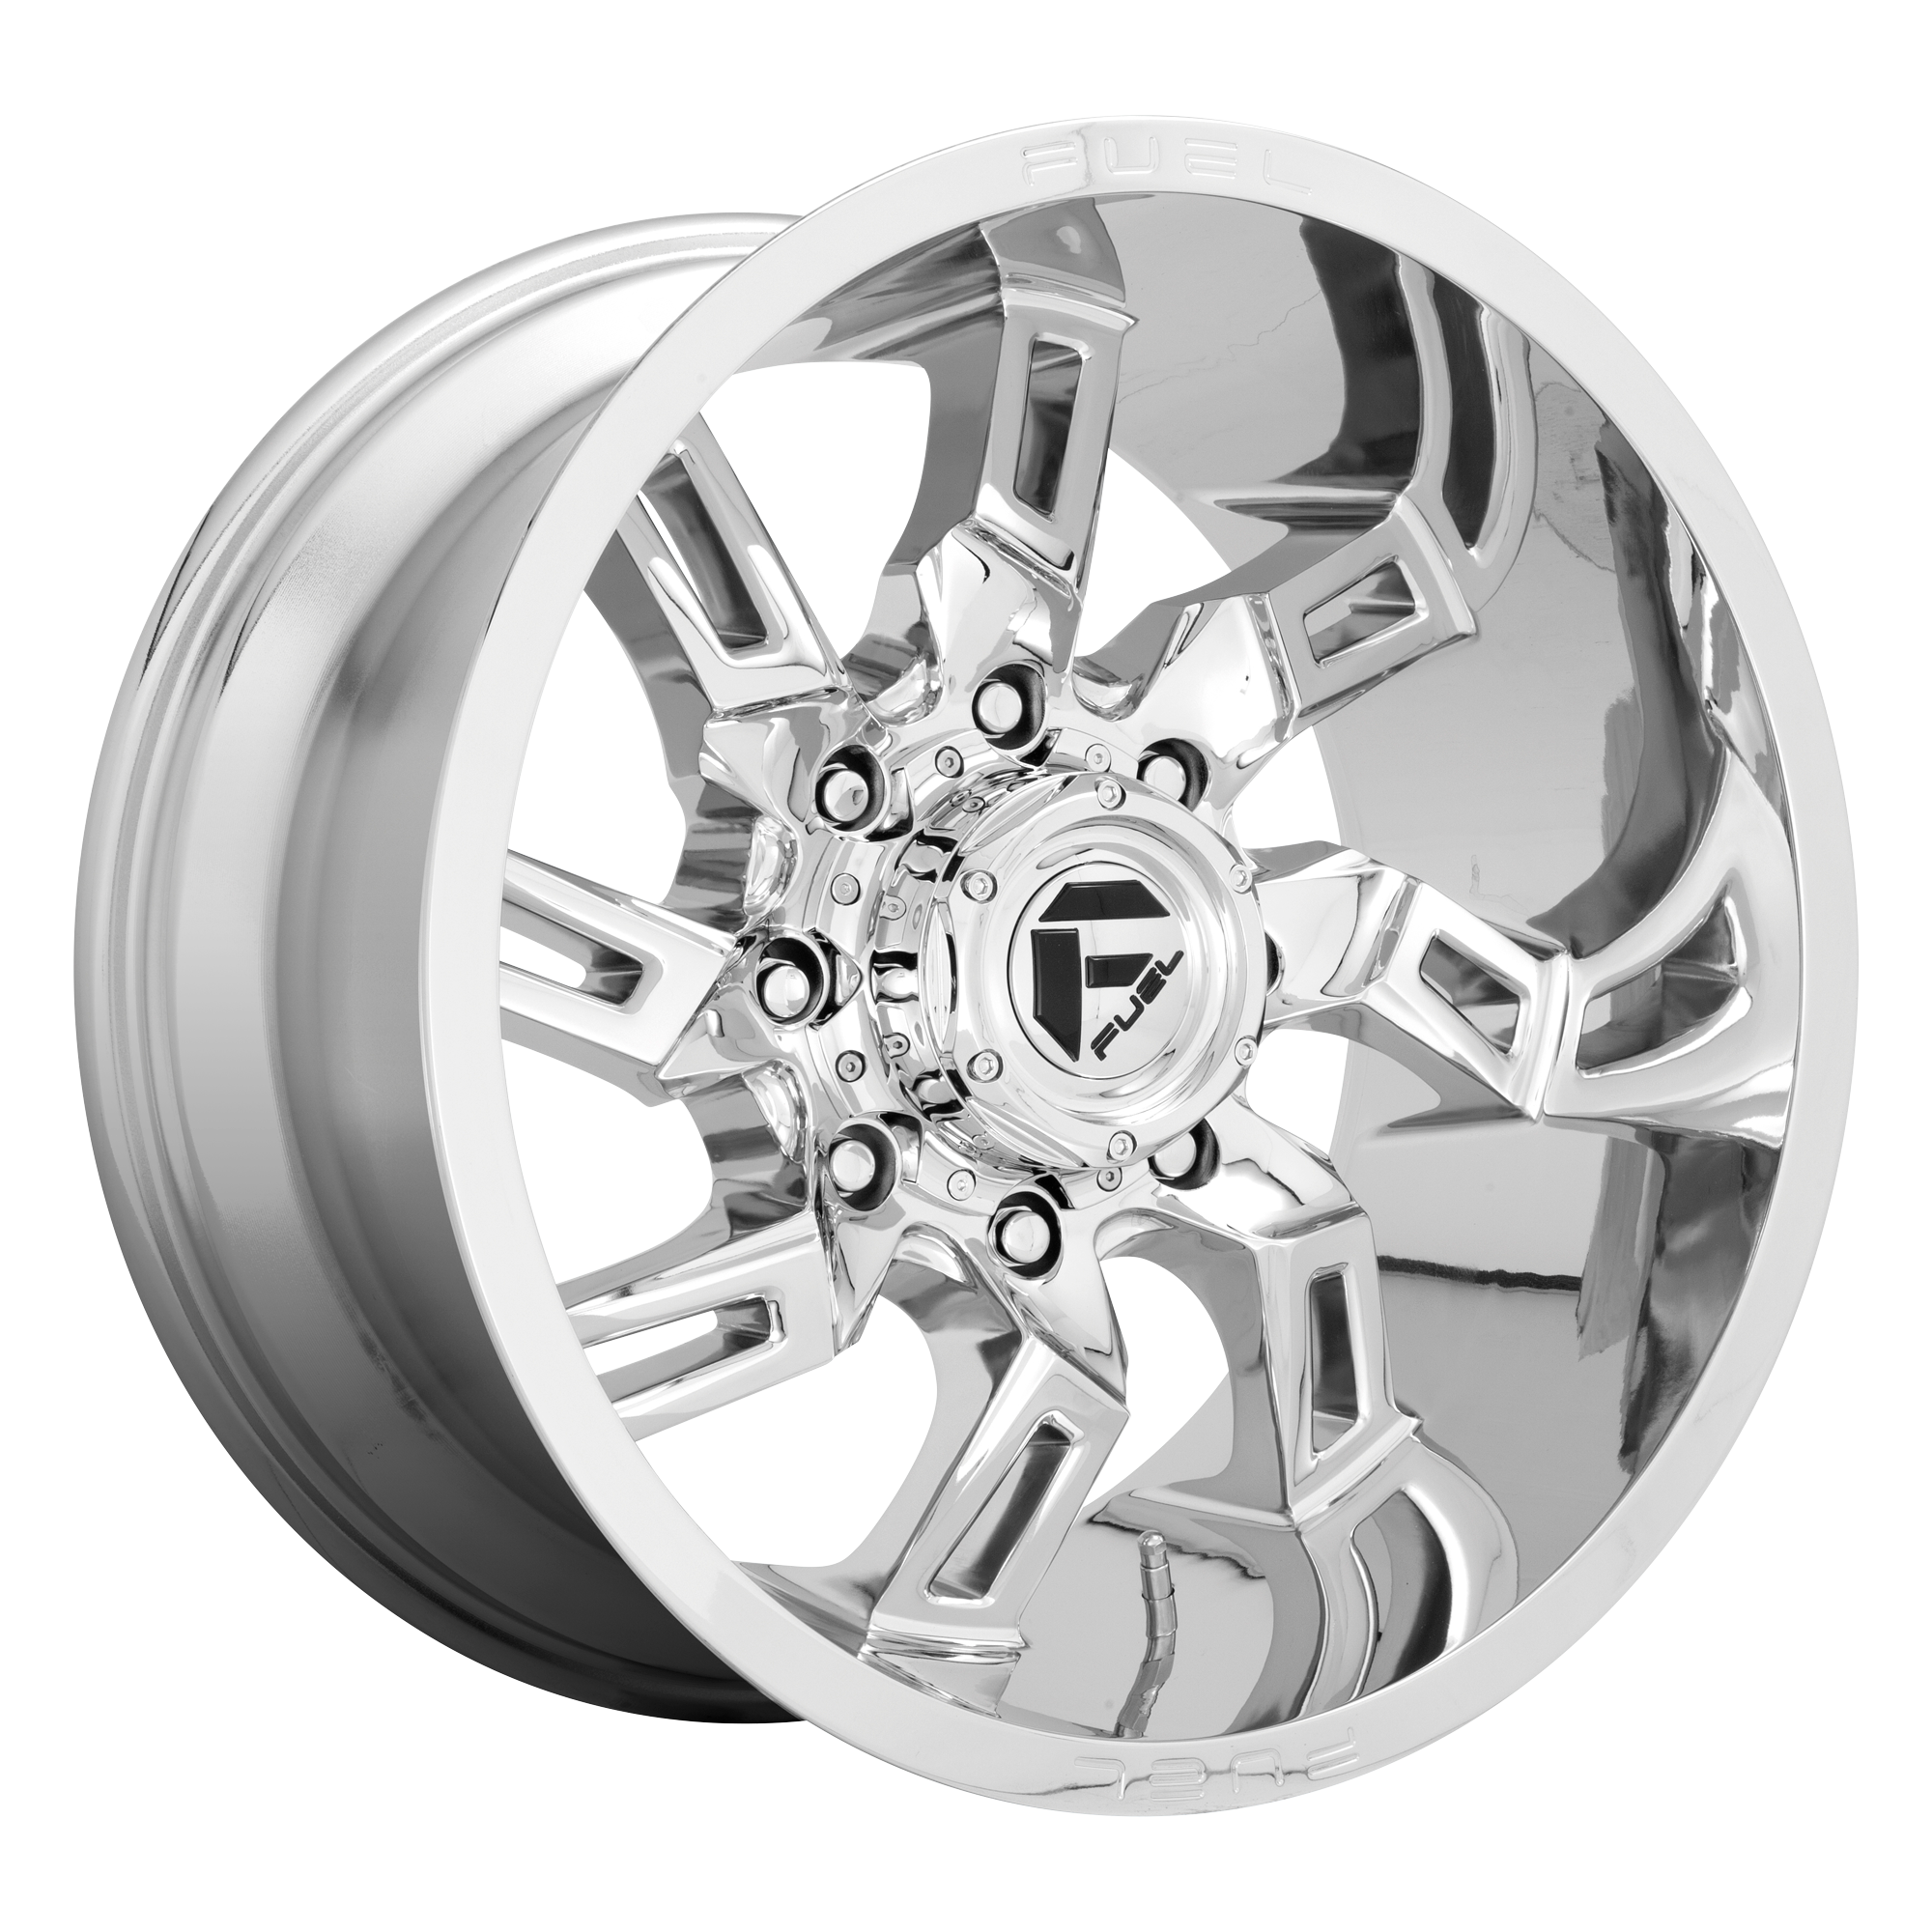 LOCKDOWN 20x10 8x170.00 CHROME (-18 mm) - Tires and Engine Performance